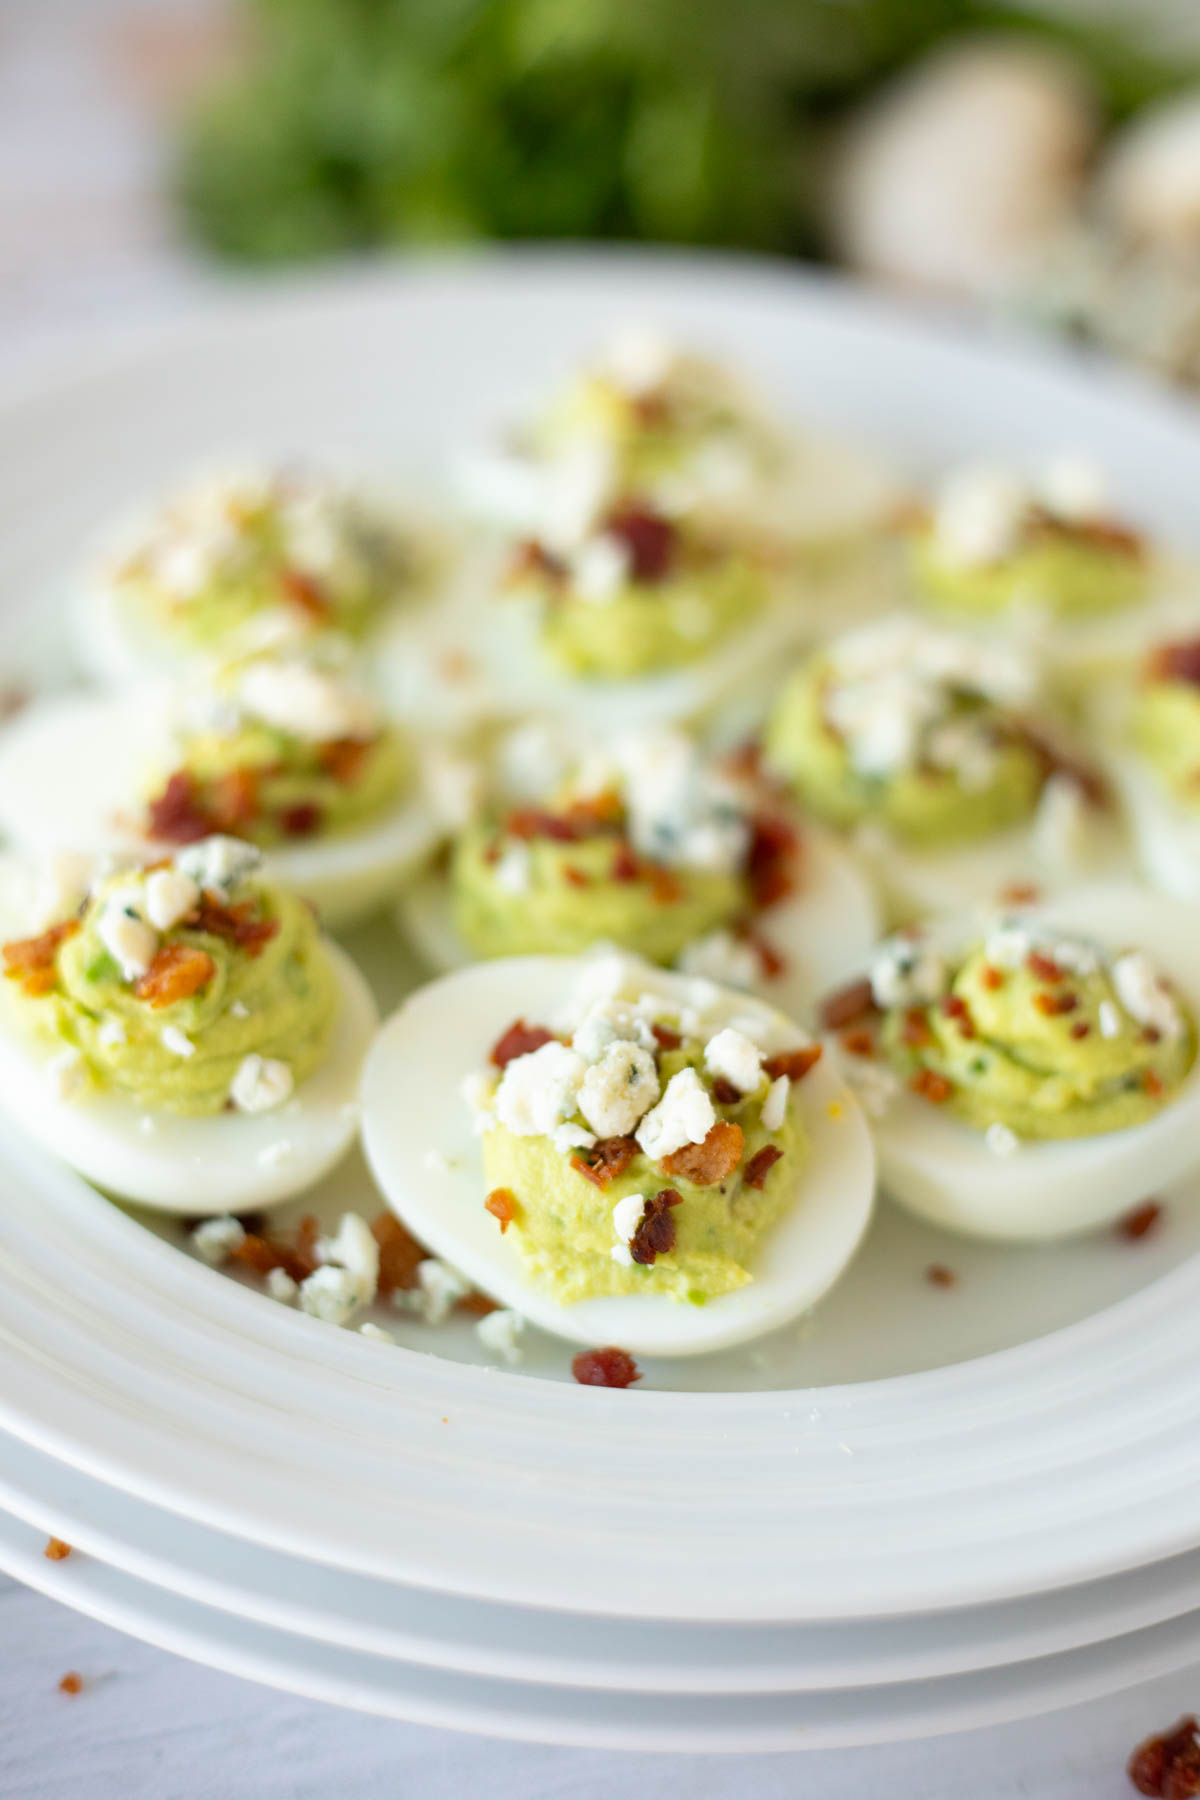 A plate of deviled eggs garnished with bacon and crumbled cheese.